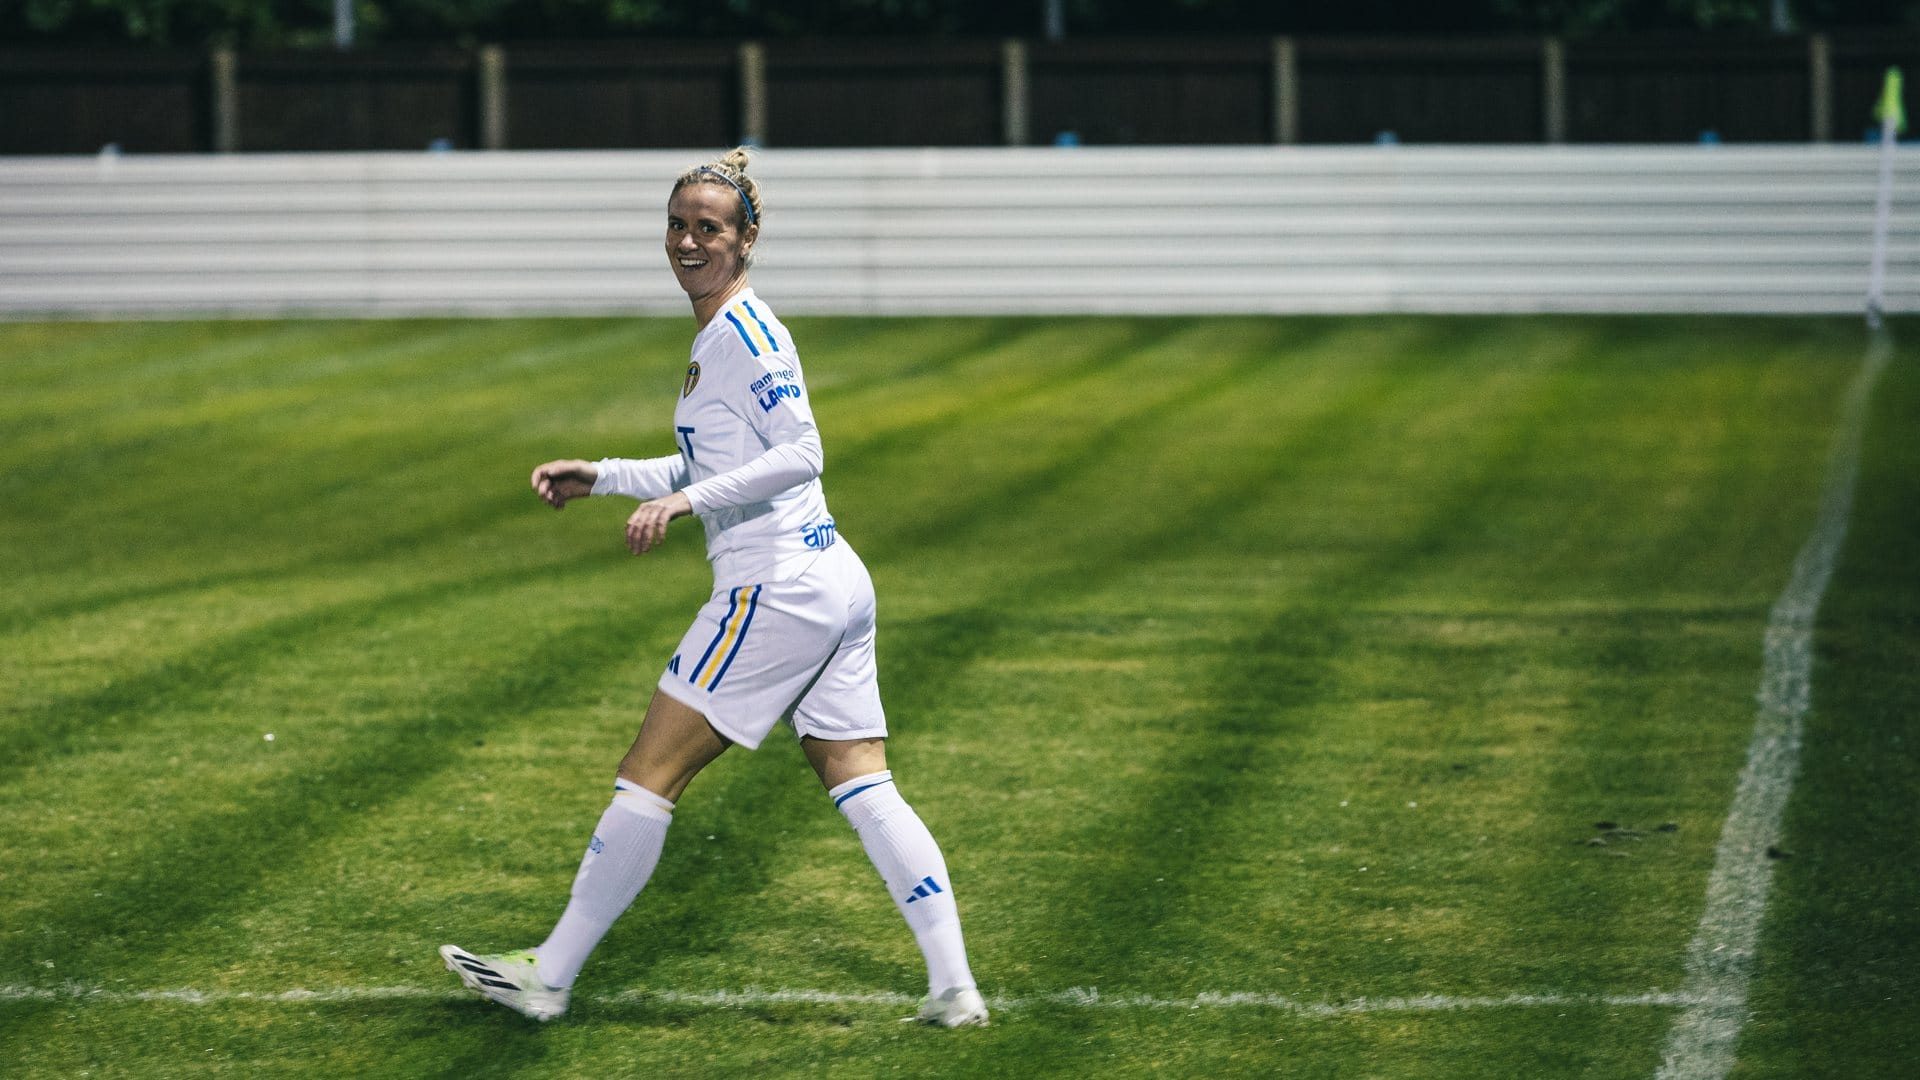 Olivia Smart of Leeds United Women striding onto the pitch at Garforth before playing FCUM, turning to the camera and laughing